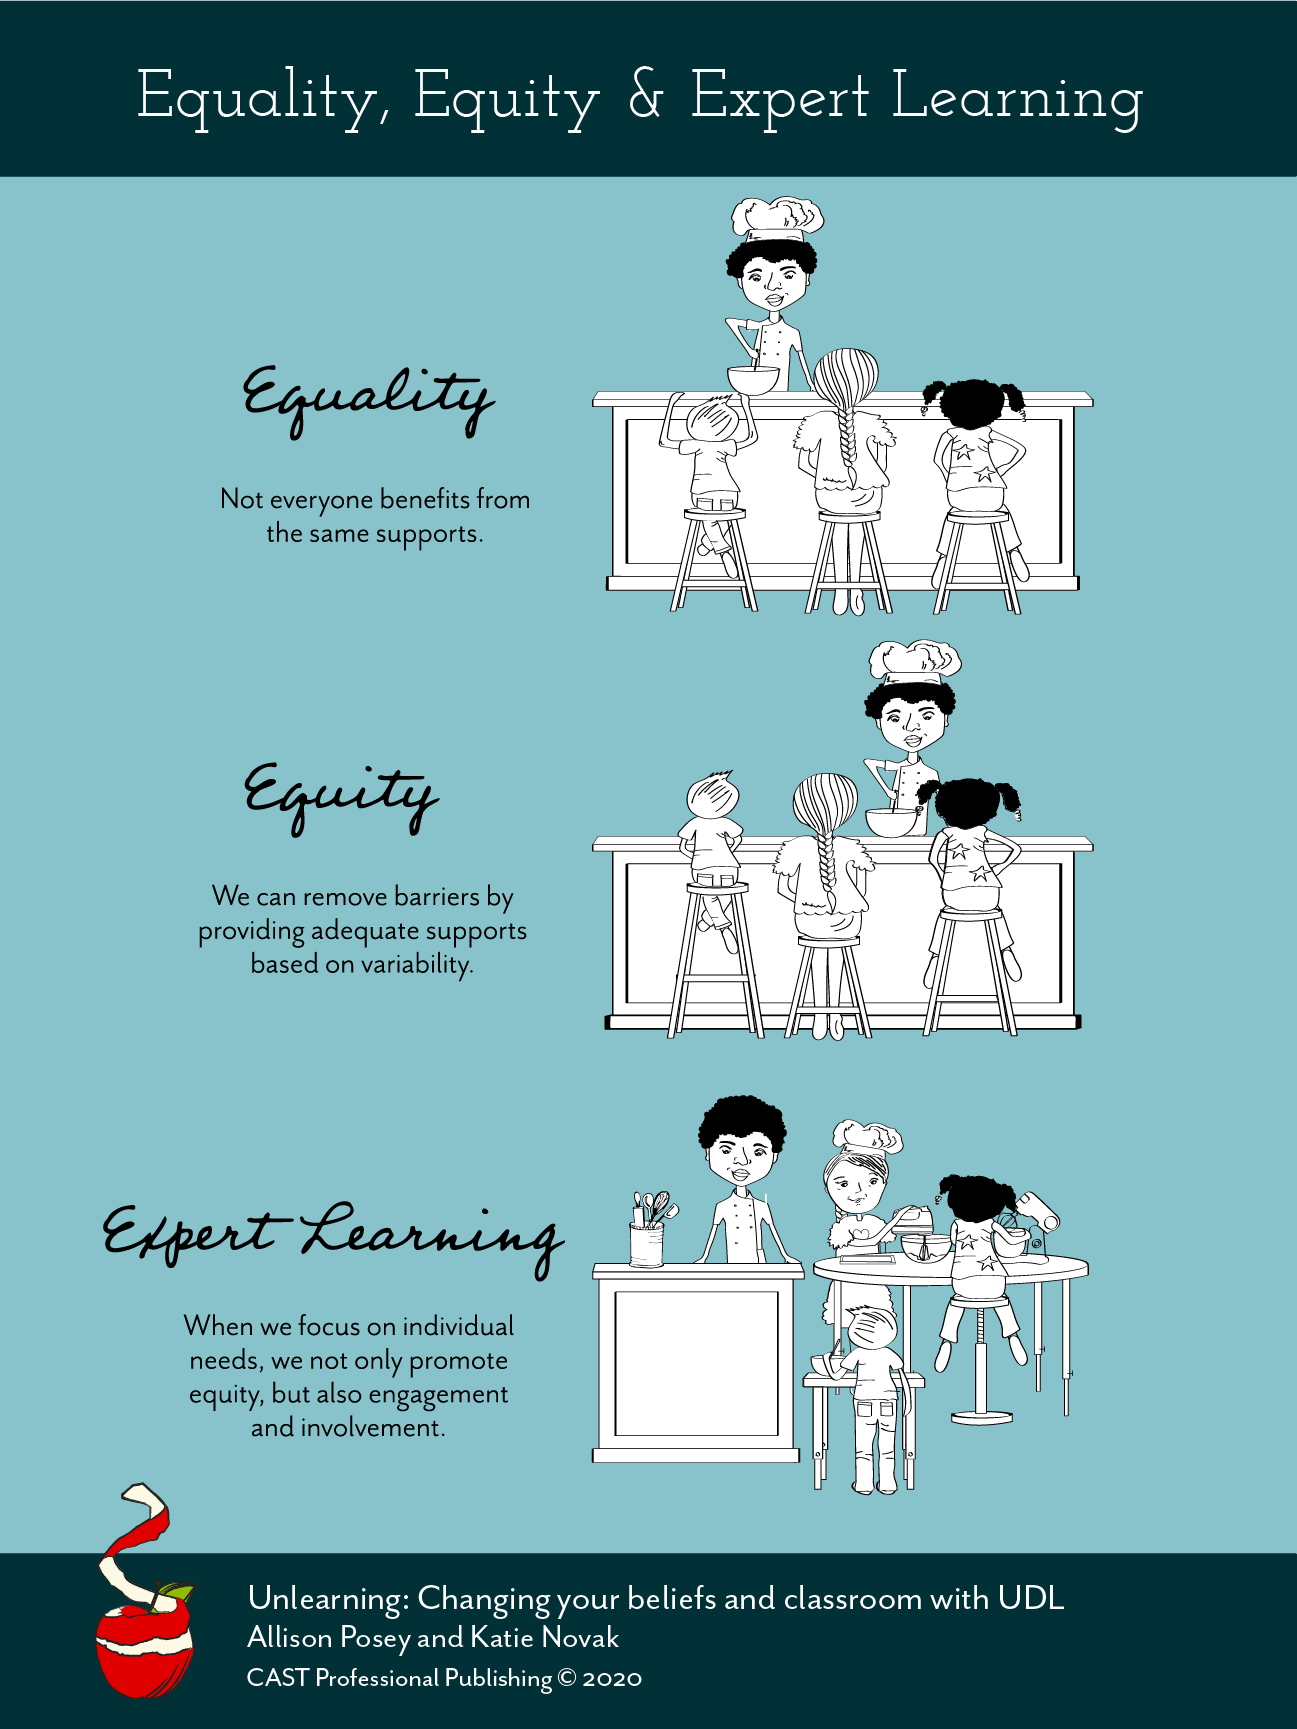 unlearning_equality, equity, expert learning infographic